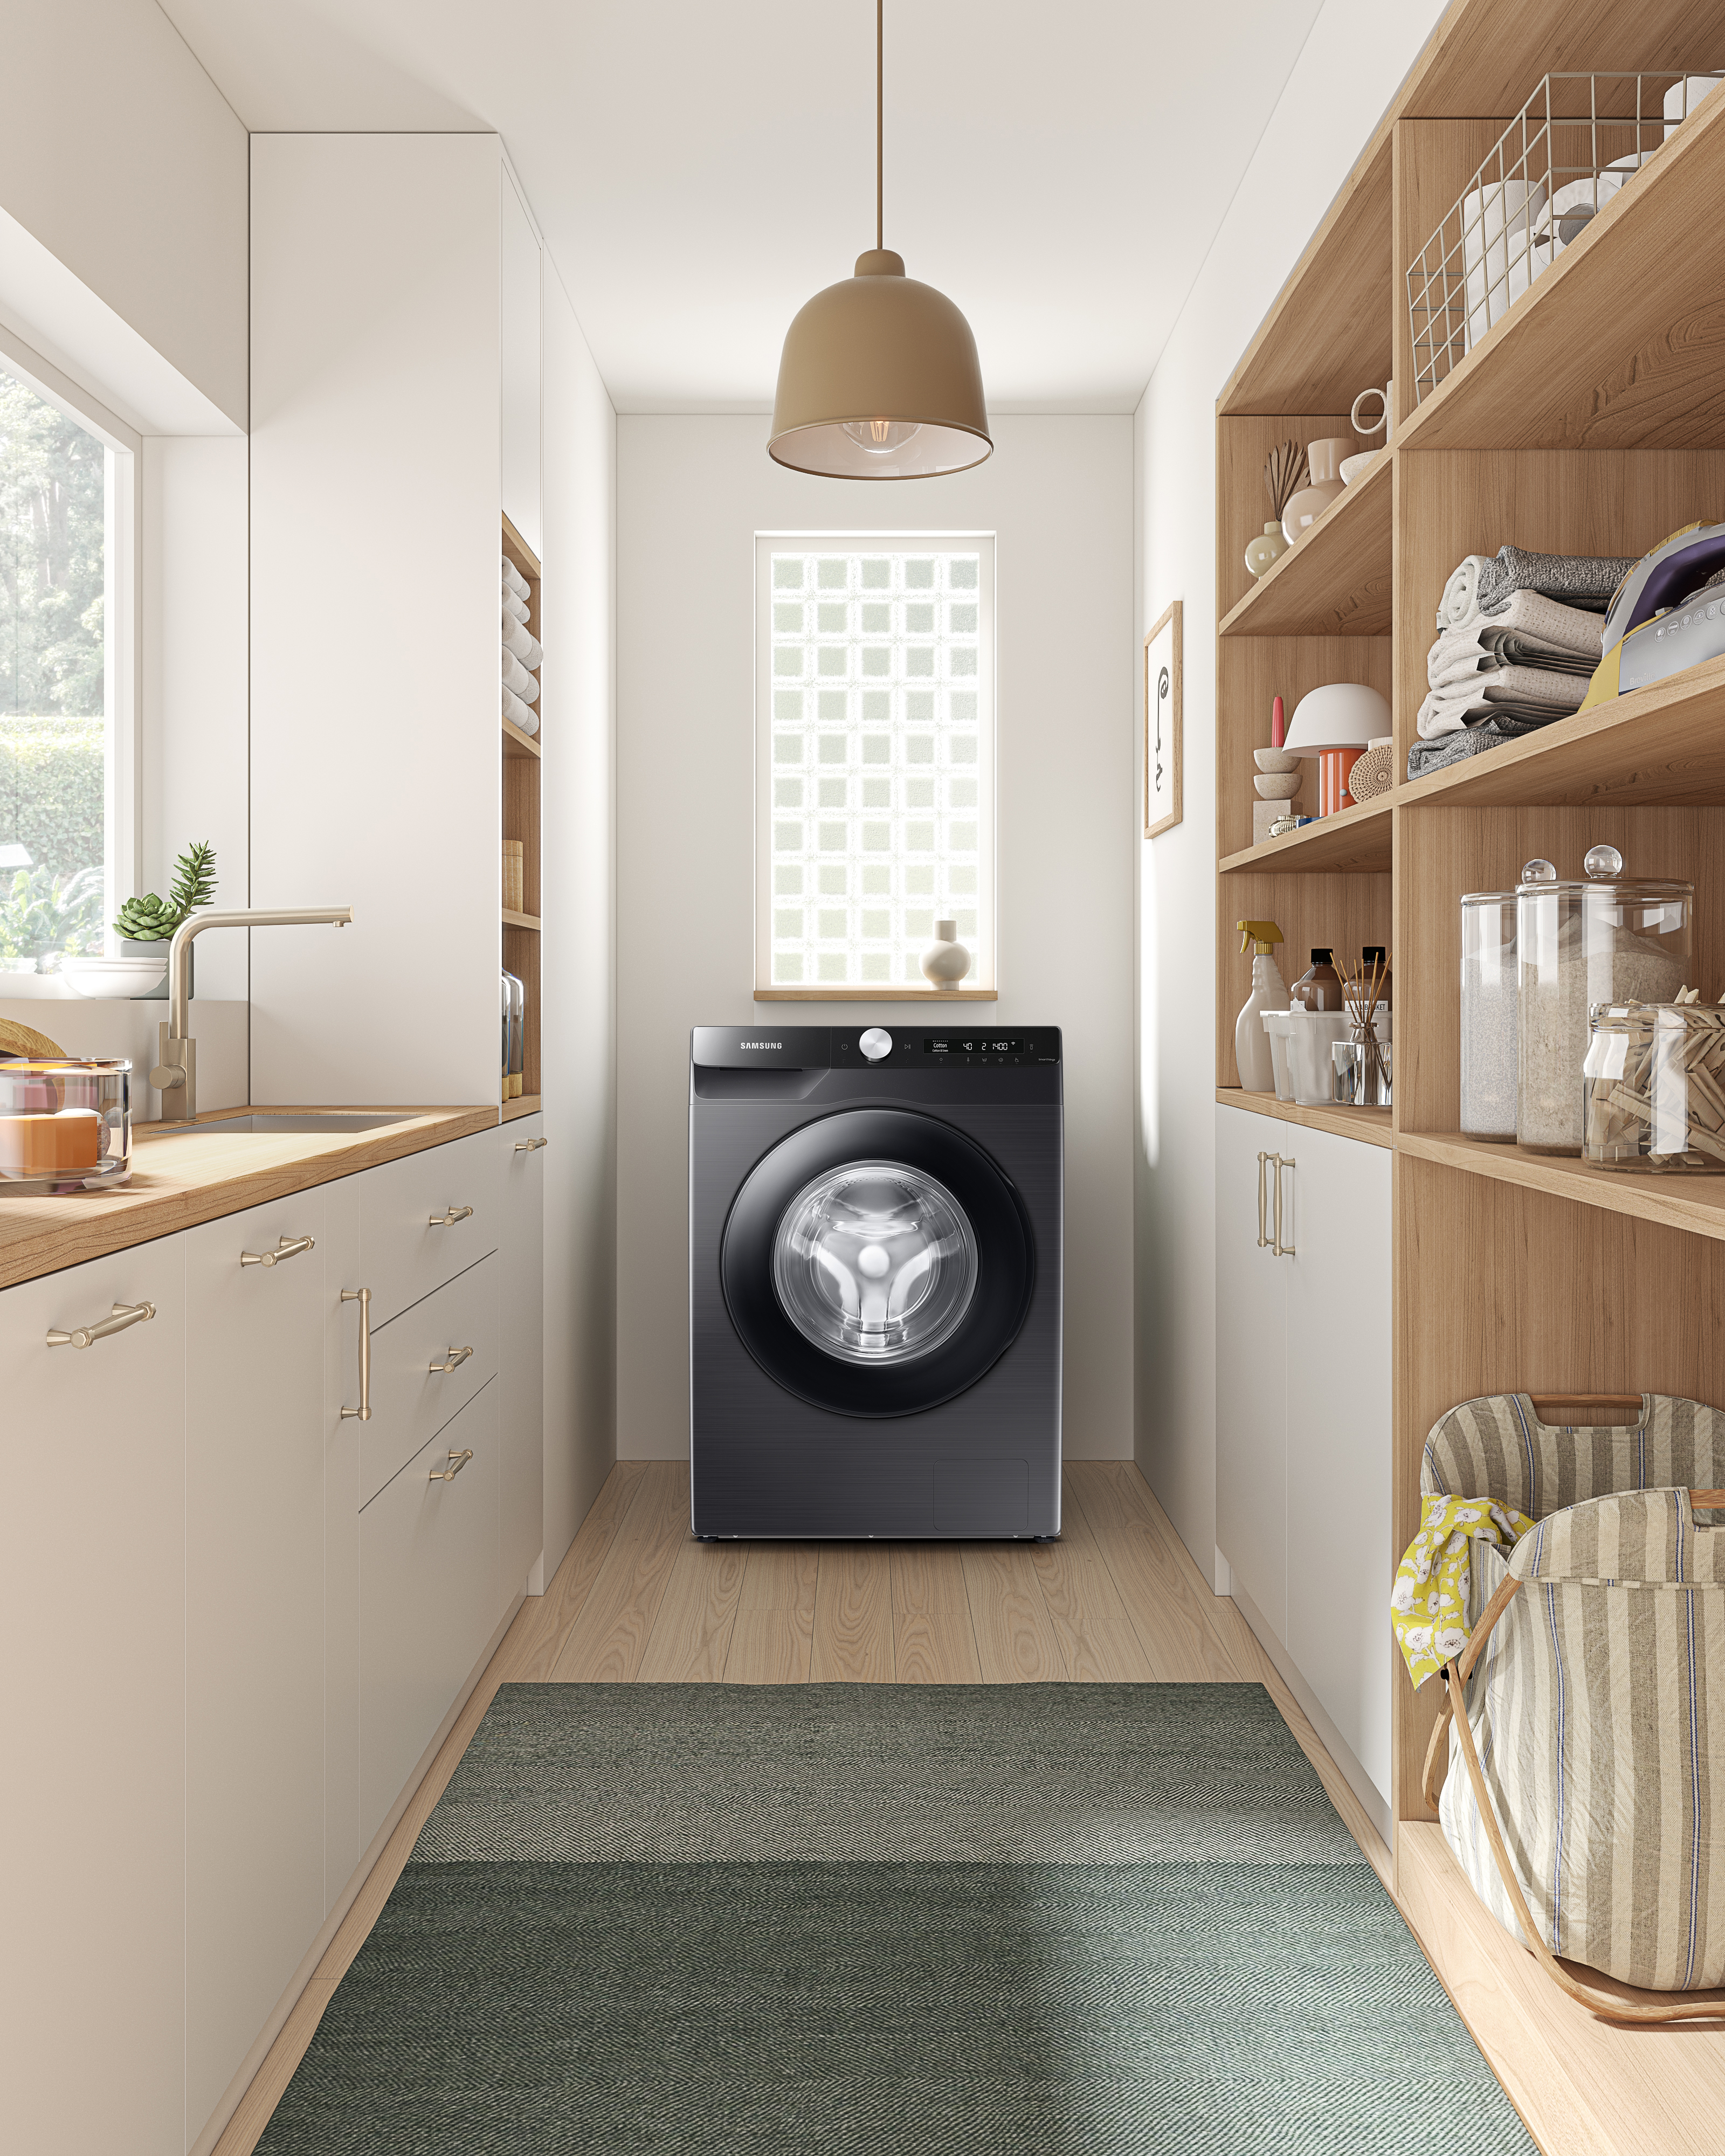 Samsung Launches its AI-Enabled & Connected AI EcoBubble™ Washing Machine Range for 2022 with AI Wash & Machine Learning, Adds High Capacity Models